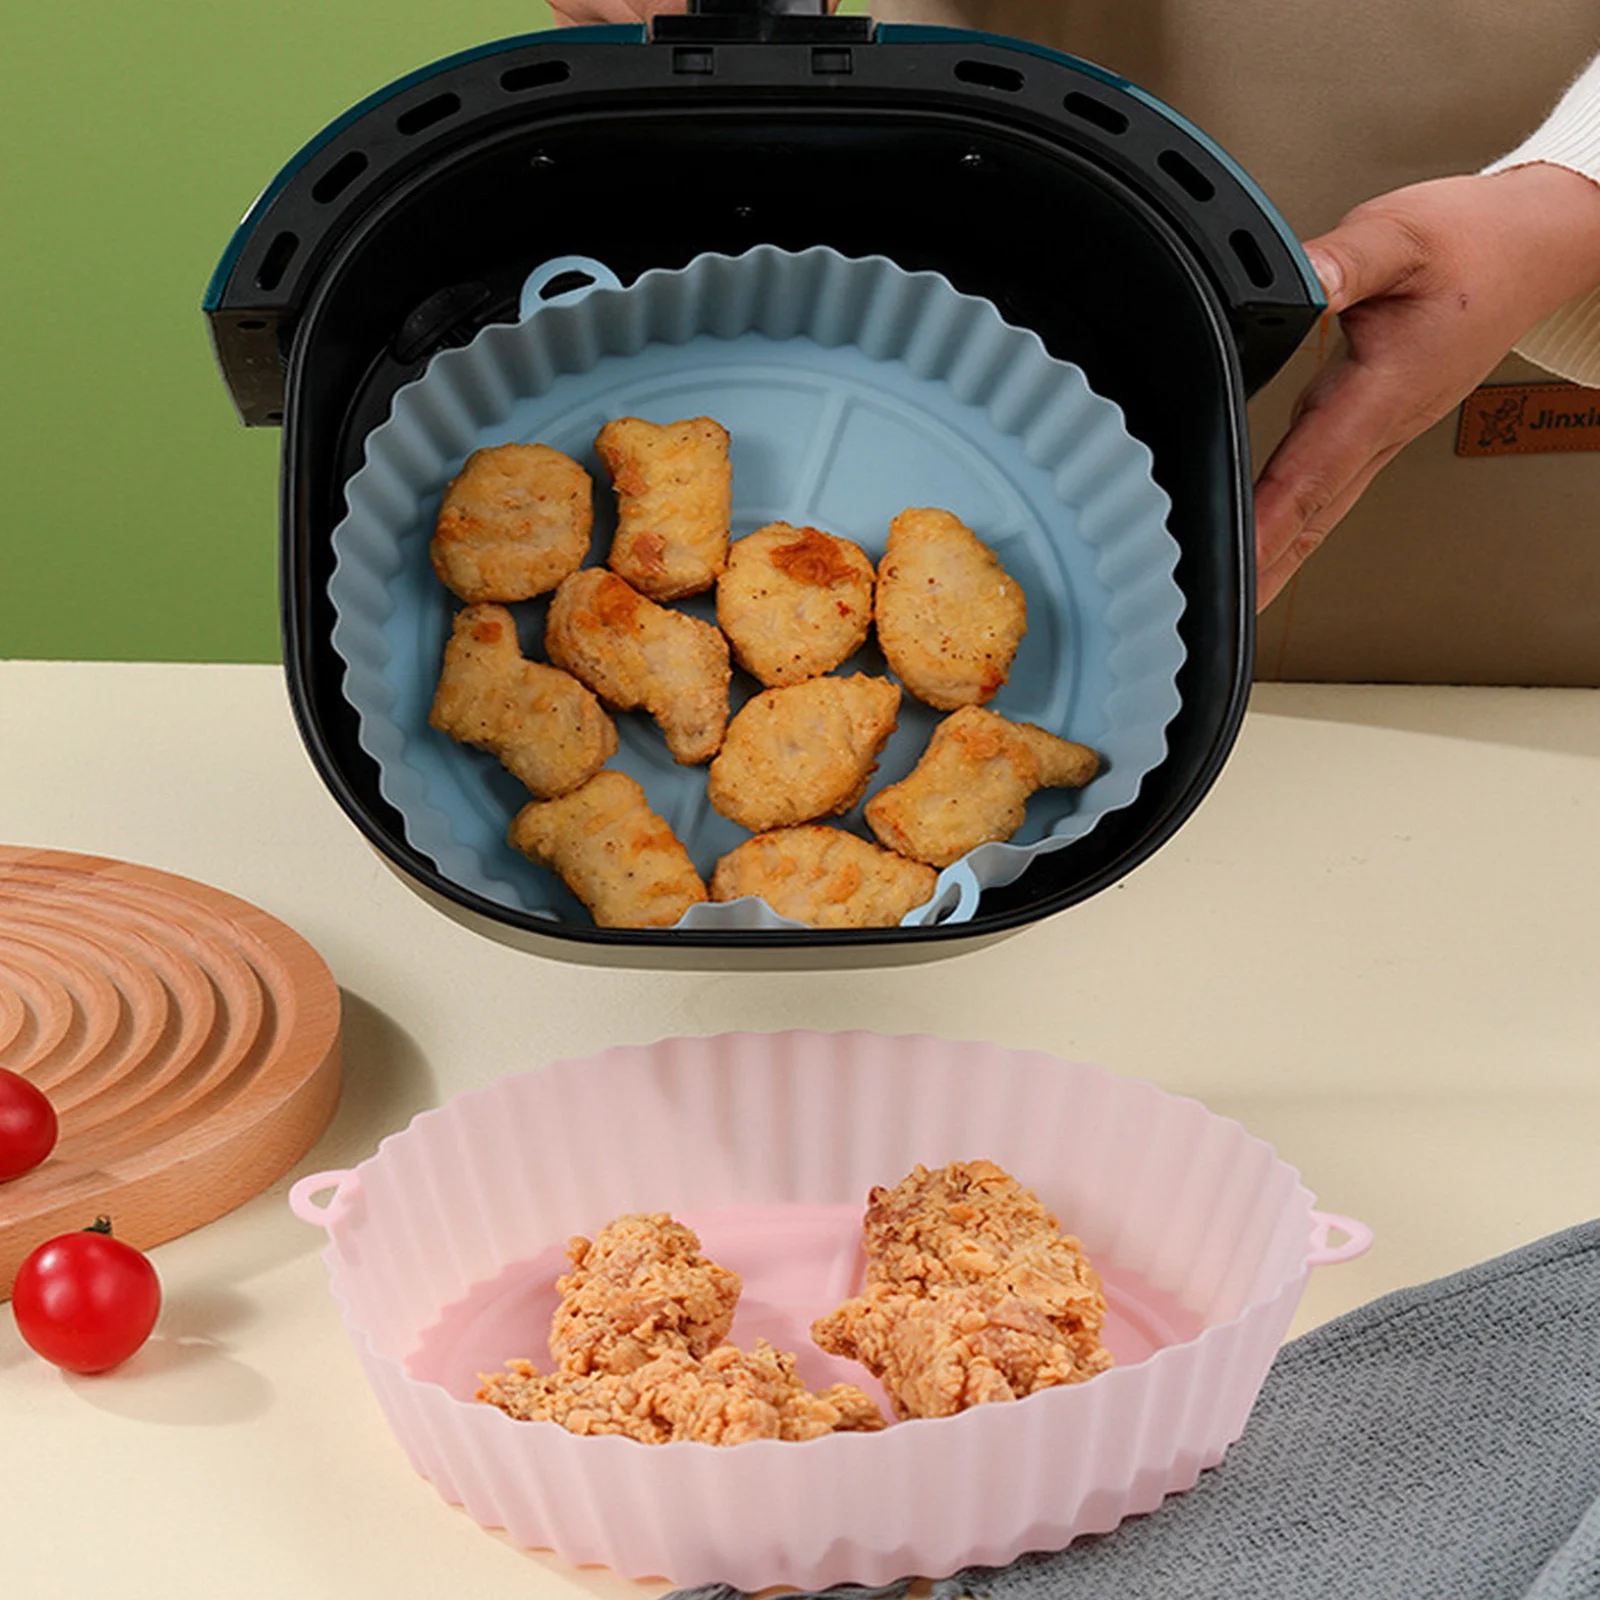 https://ae01.alicdn.com/kf/S0f0e43bc35f5438689c0bab2c65672fbc/Air-Fryers-Silicone-Baking-Pan-Round-Air-Fryer-Pad-Liner-Baking-Tray-Oven-Mat-AirFryer-Paper.jpg